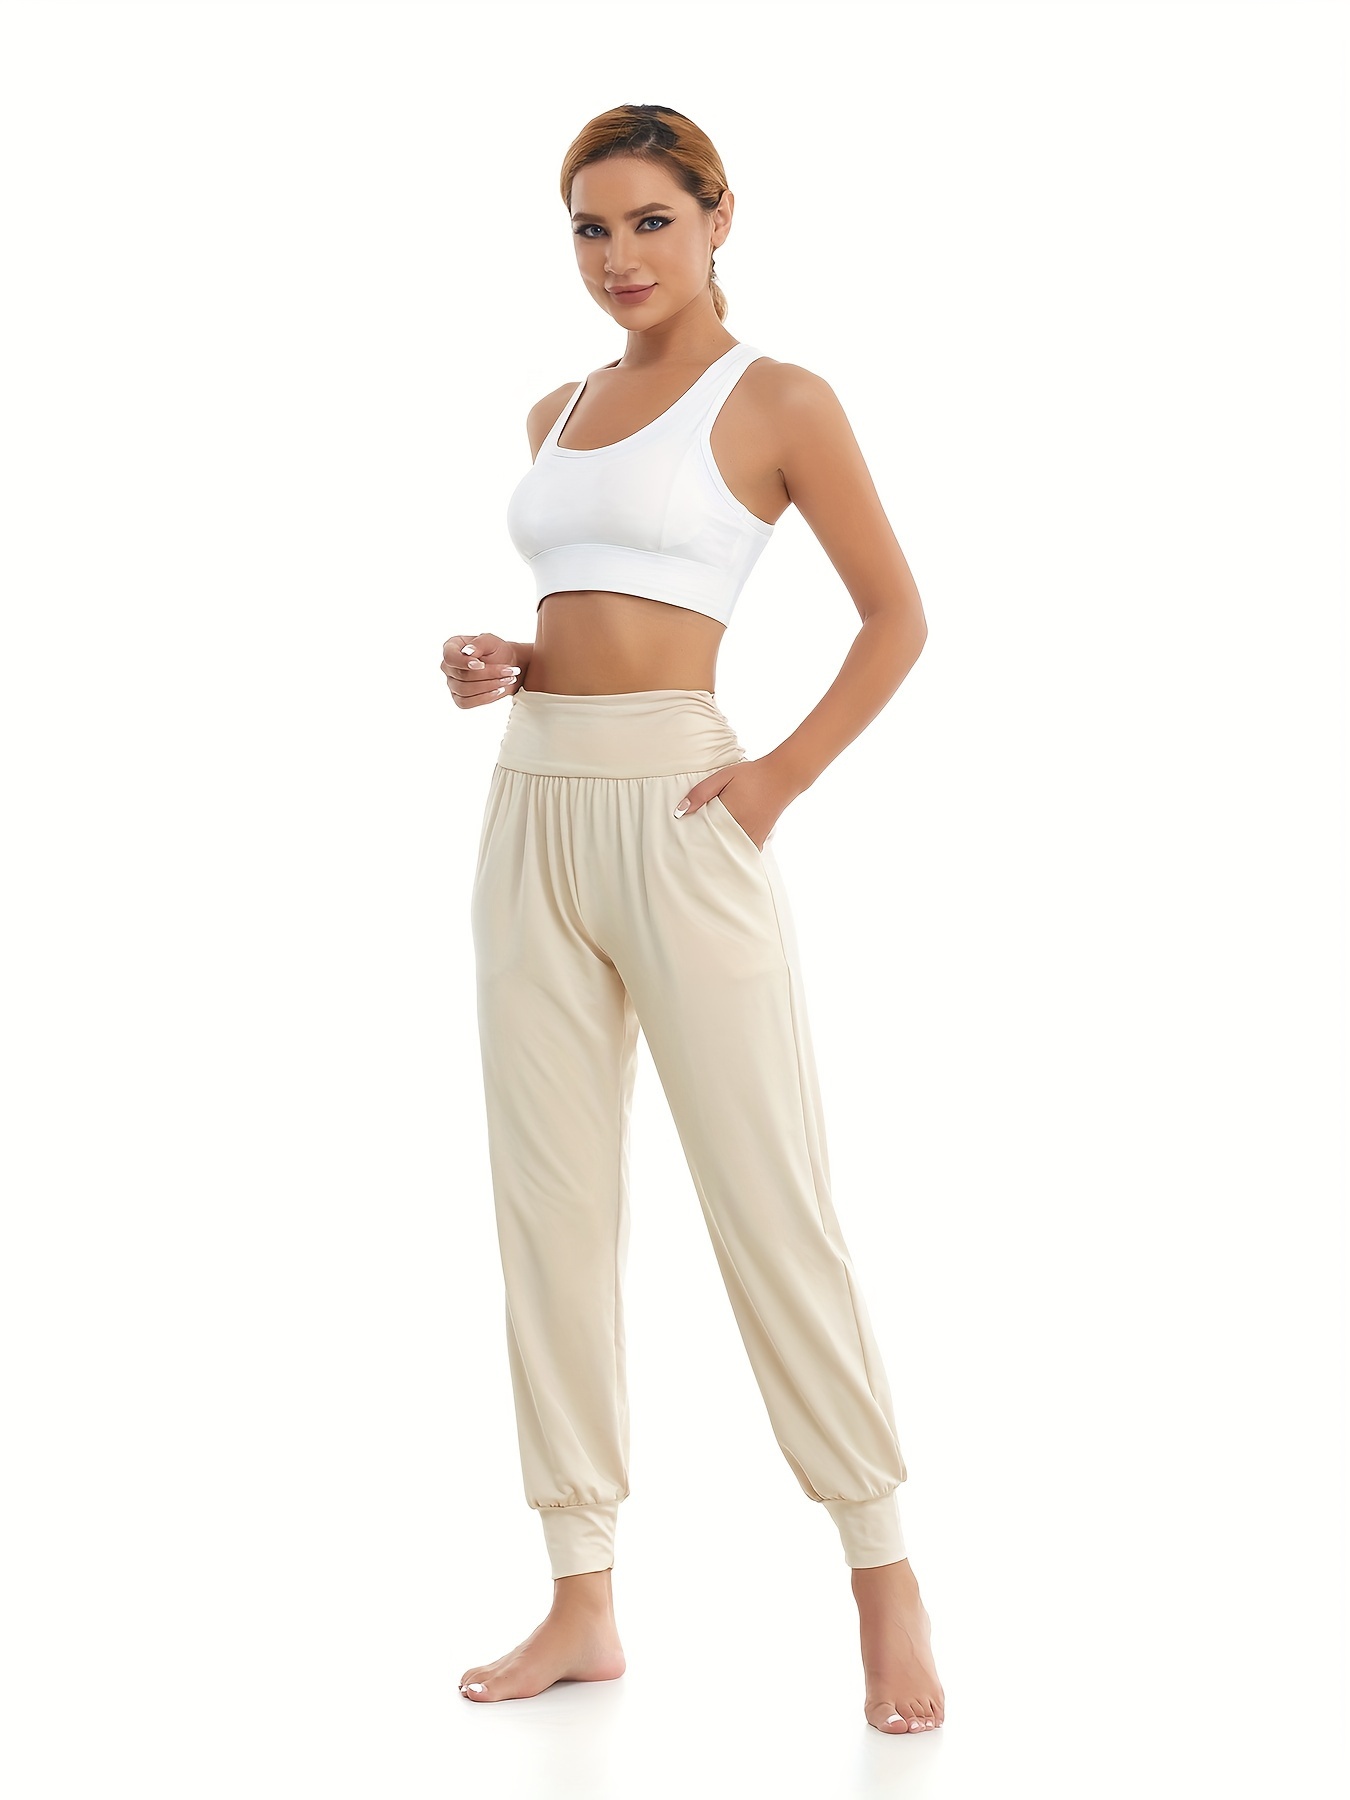 Women's Track Pants and Joggers in Exclusive Colorways